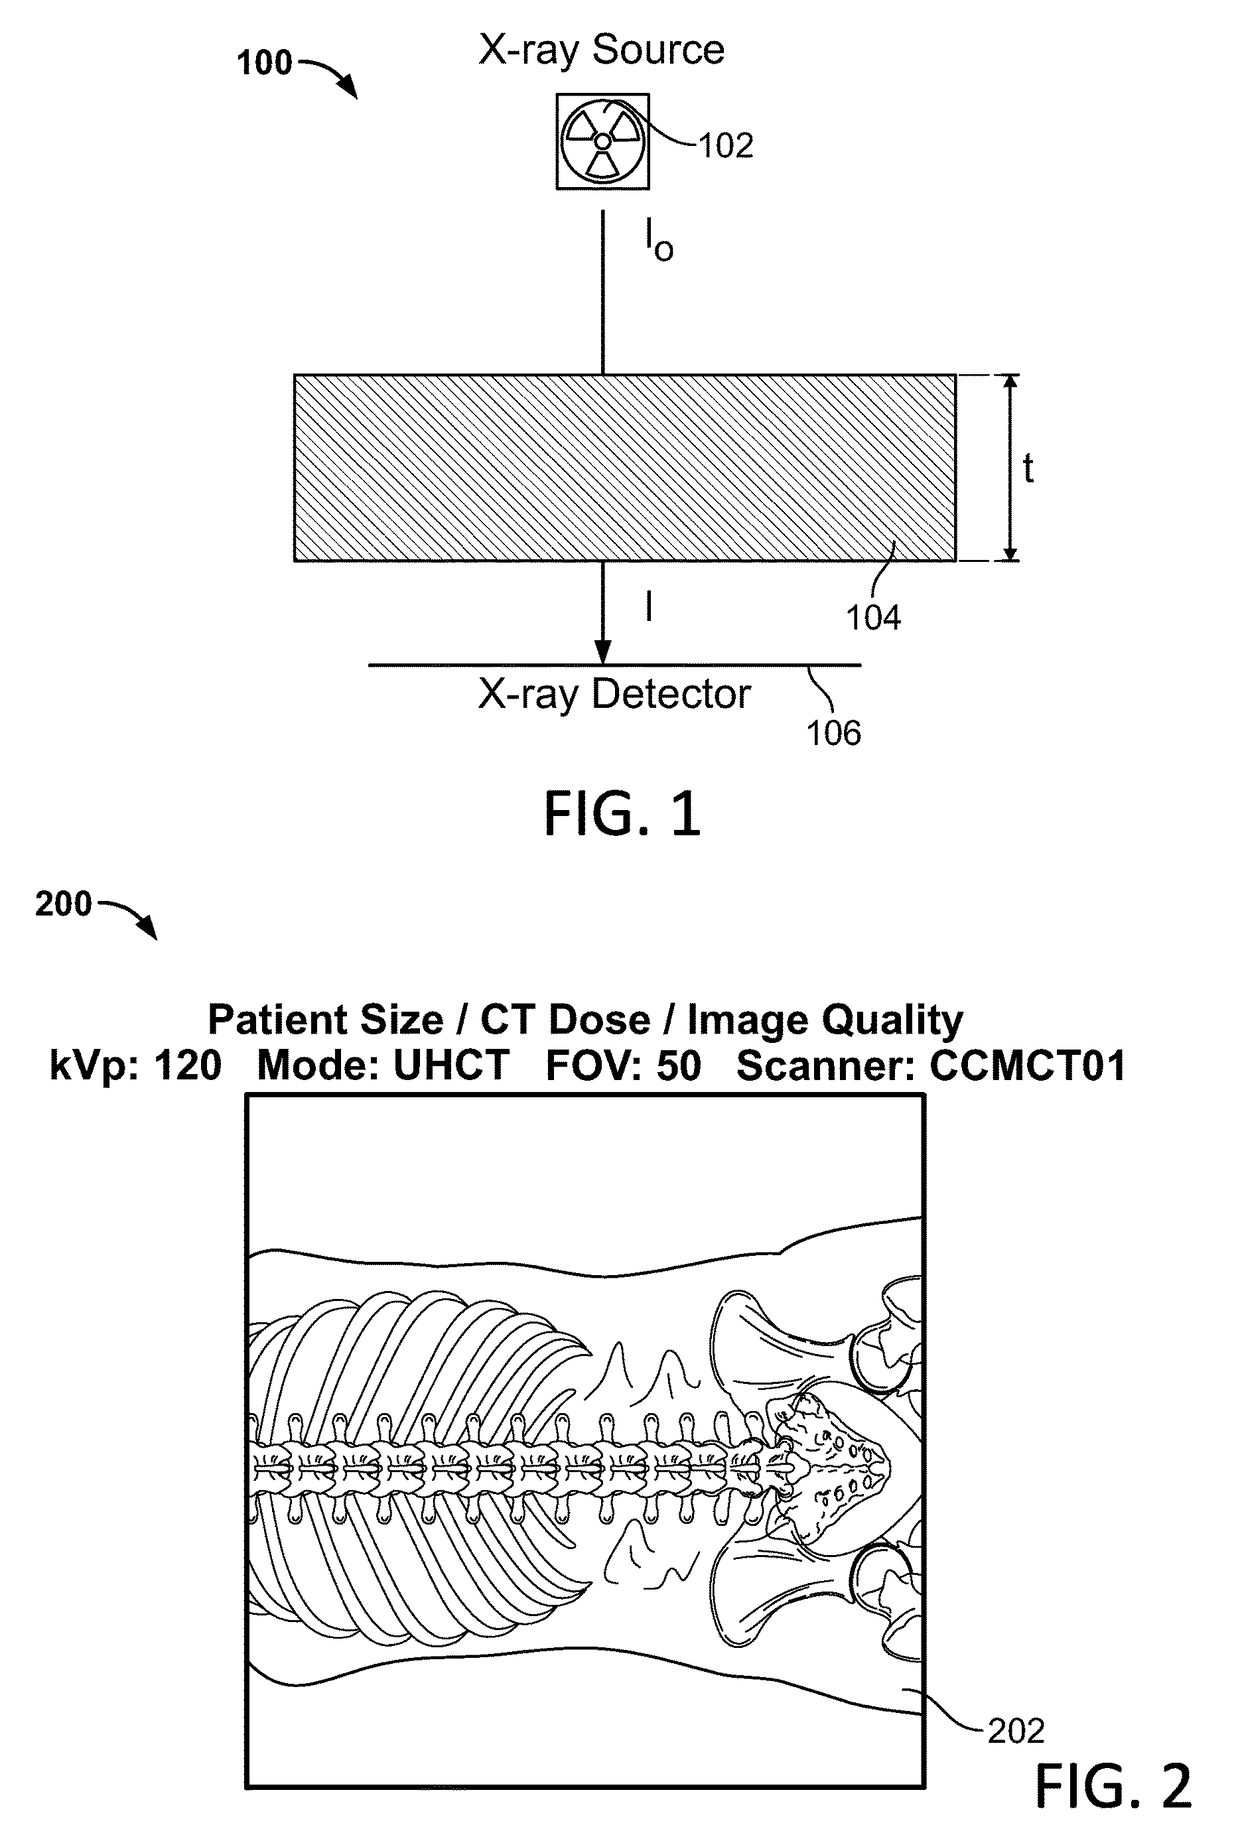 Method for consistent and verifiable optimization of computed tomography (CT) radiation dose